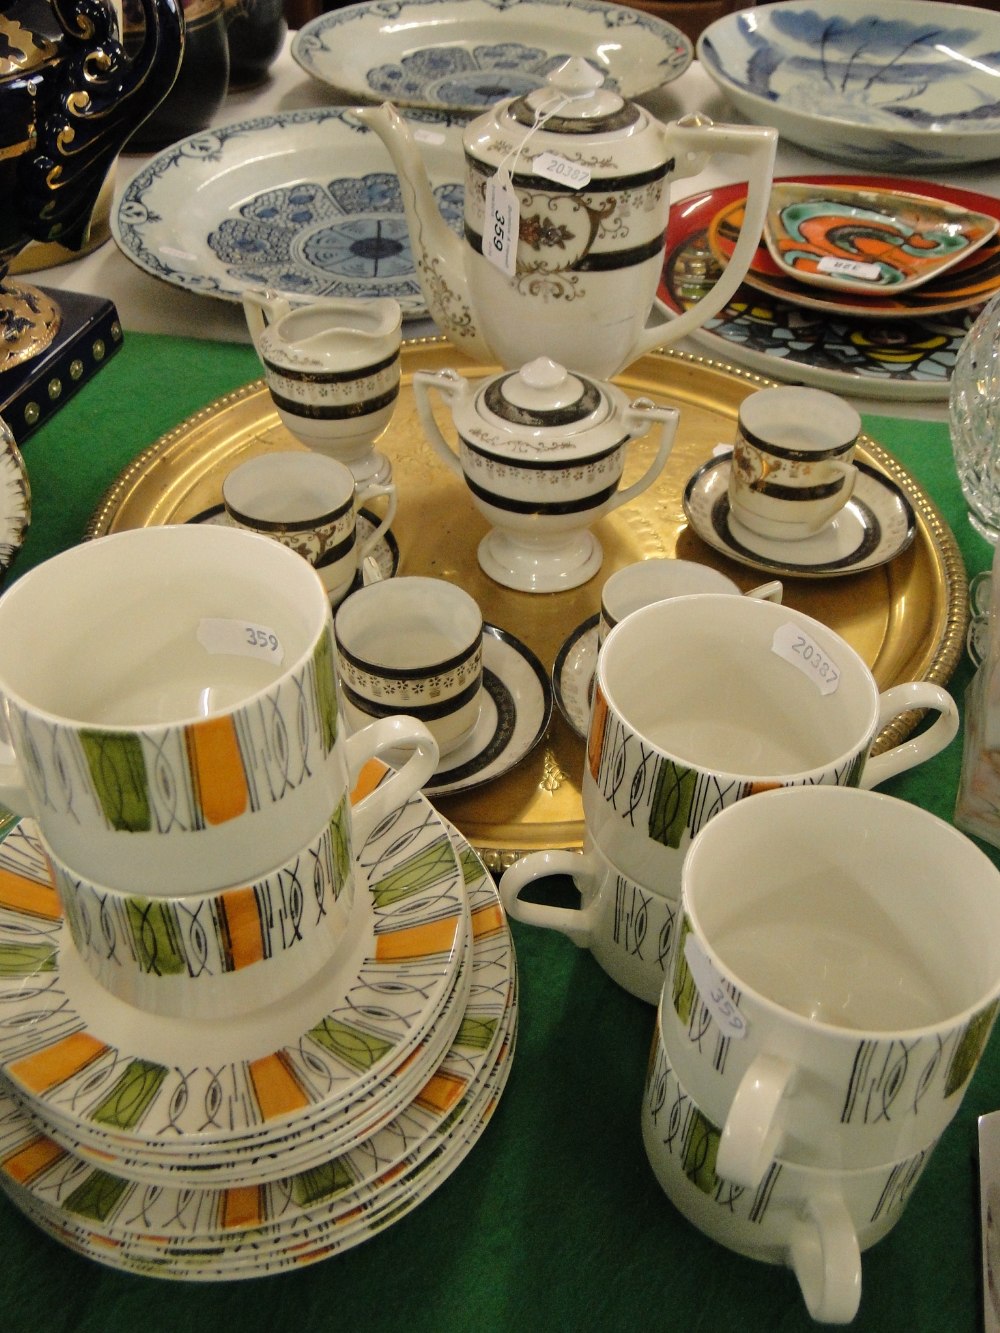 A Japanese coffee set for 4-people and an engraved brass tray, and 6 cups and saucers.